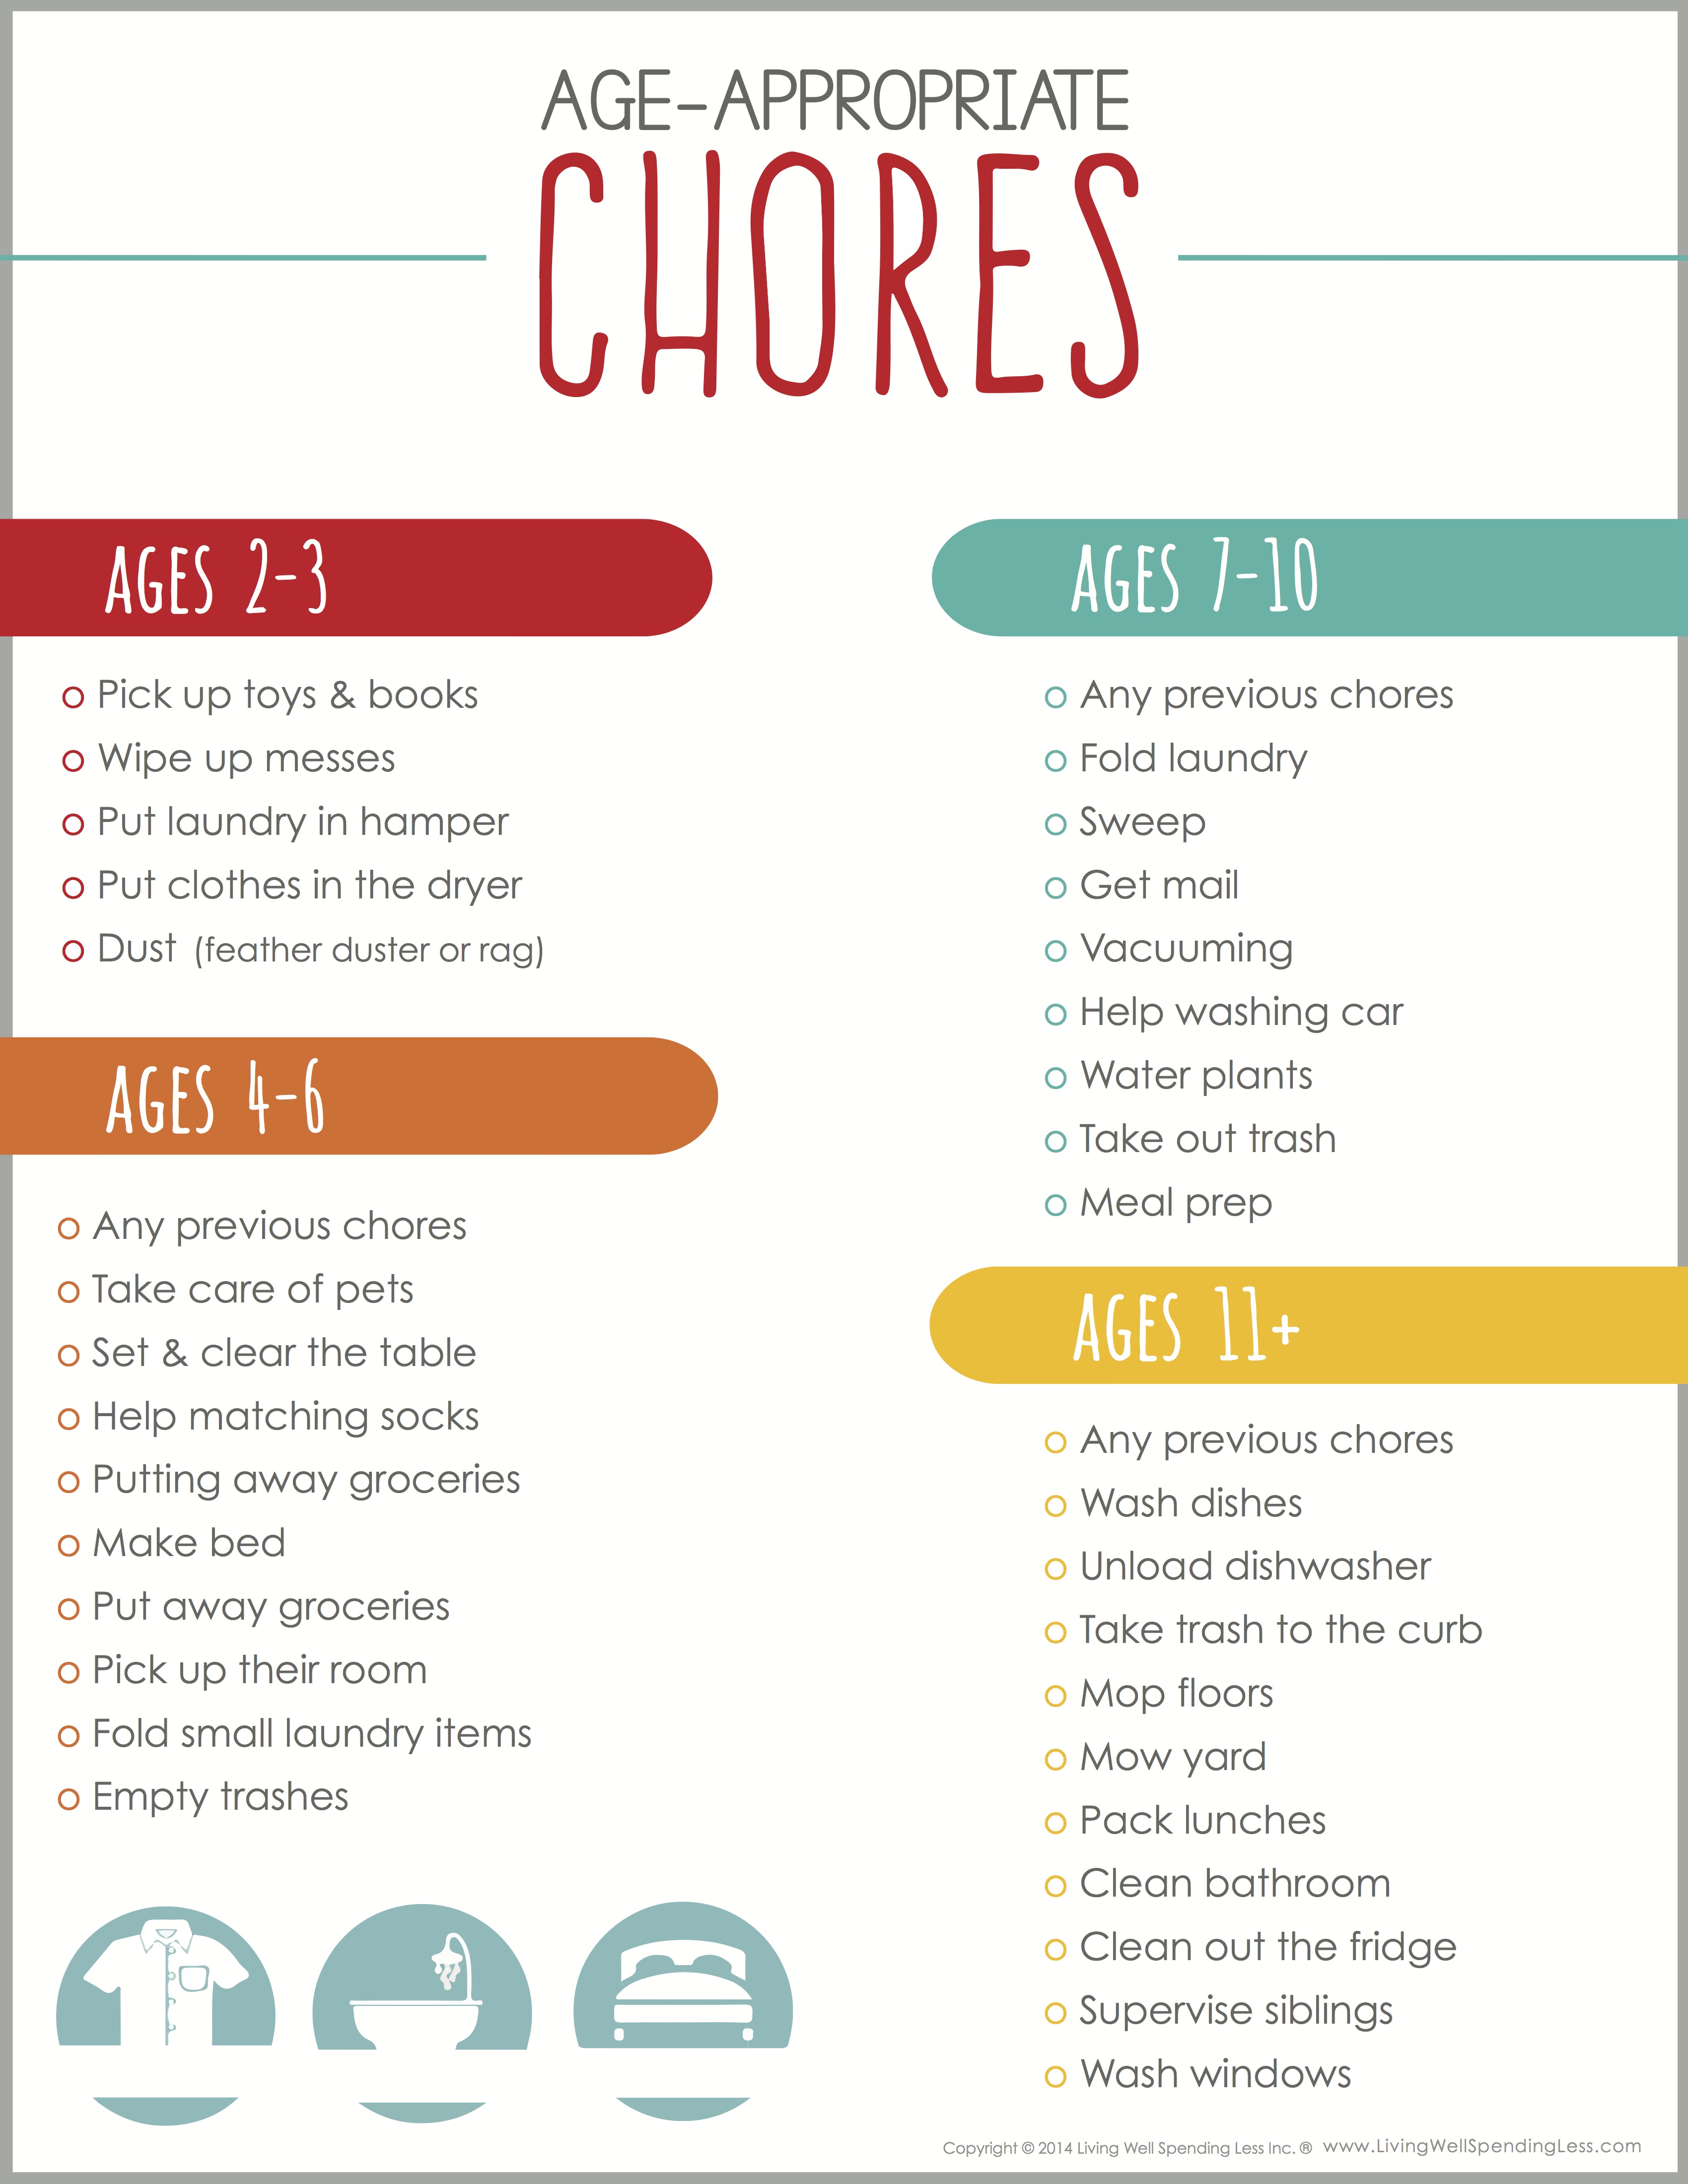 How to Make a Chore Chart for Kids | Living Well Spending ...